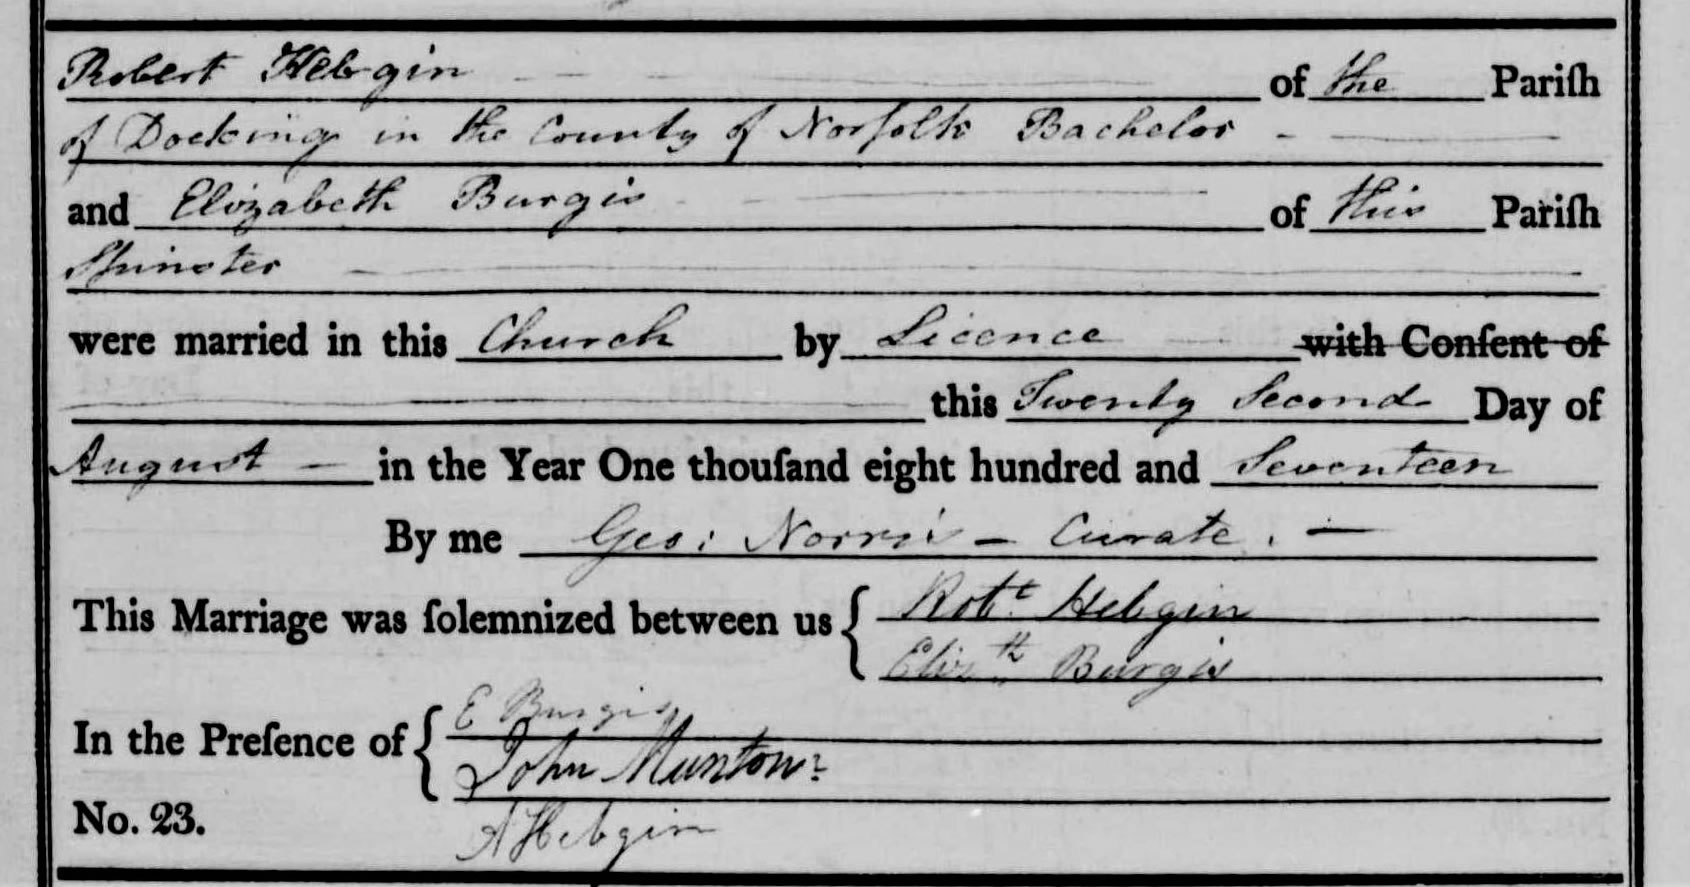 Marriage of Robert and Elizabeth by licence on 22nd of August 1817 in the Docking Parish Registers